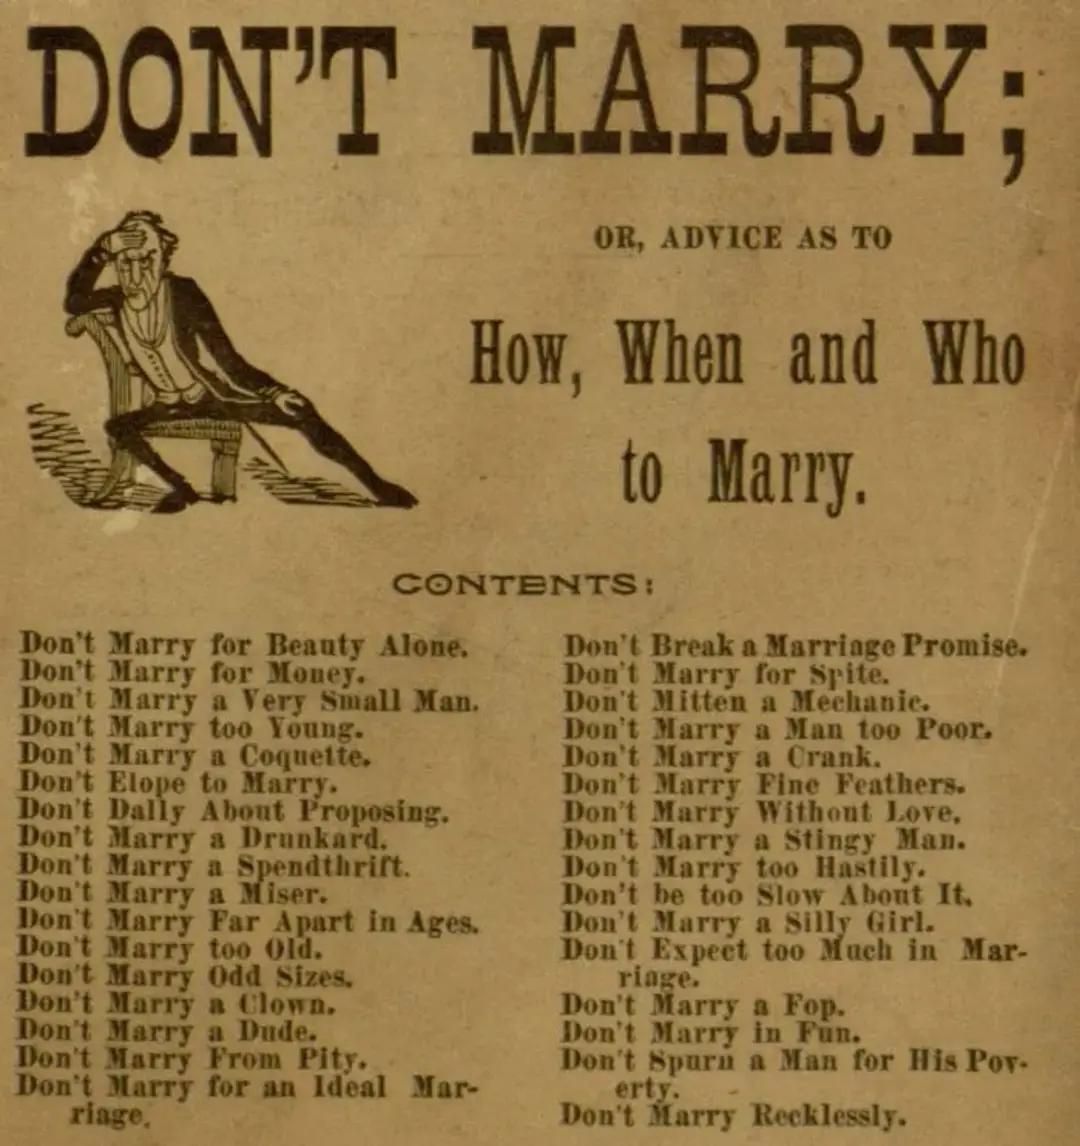 How, When and Who to Marry